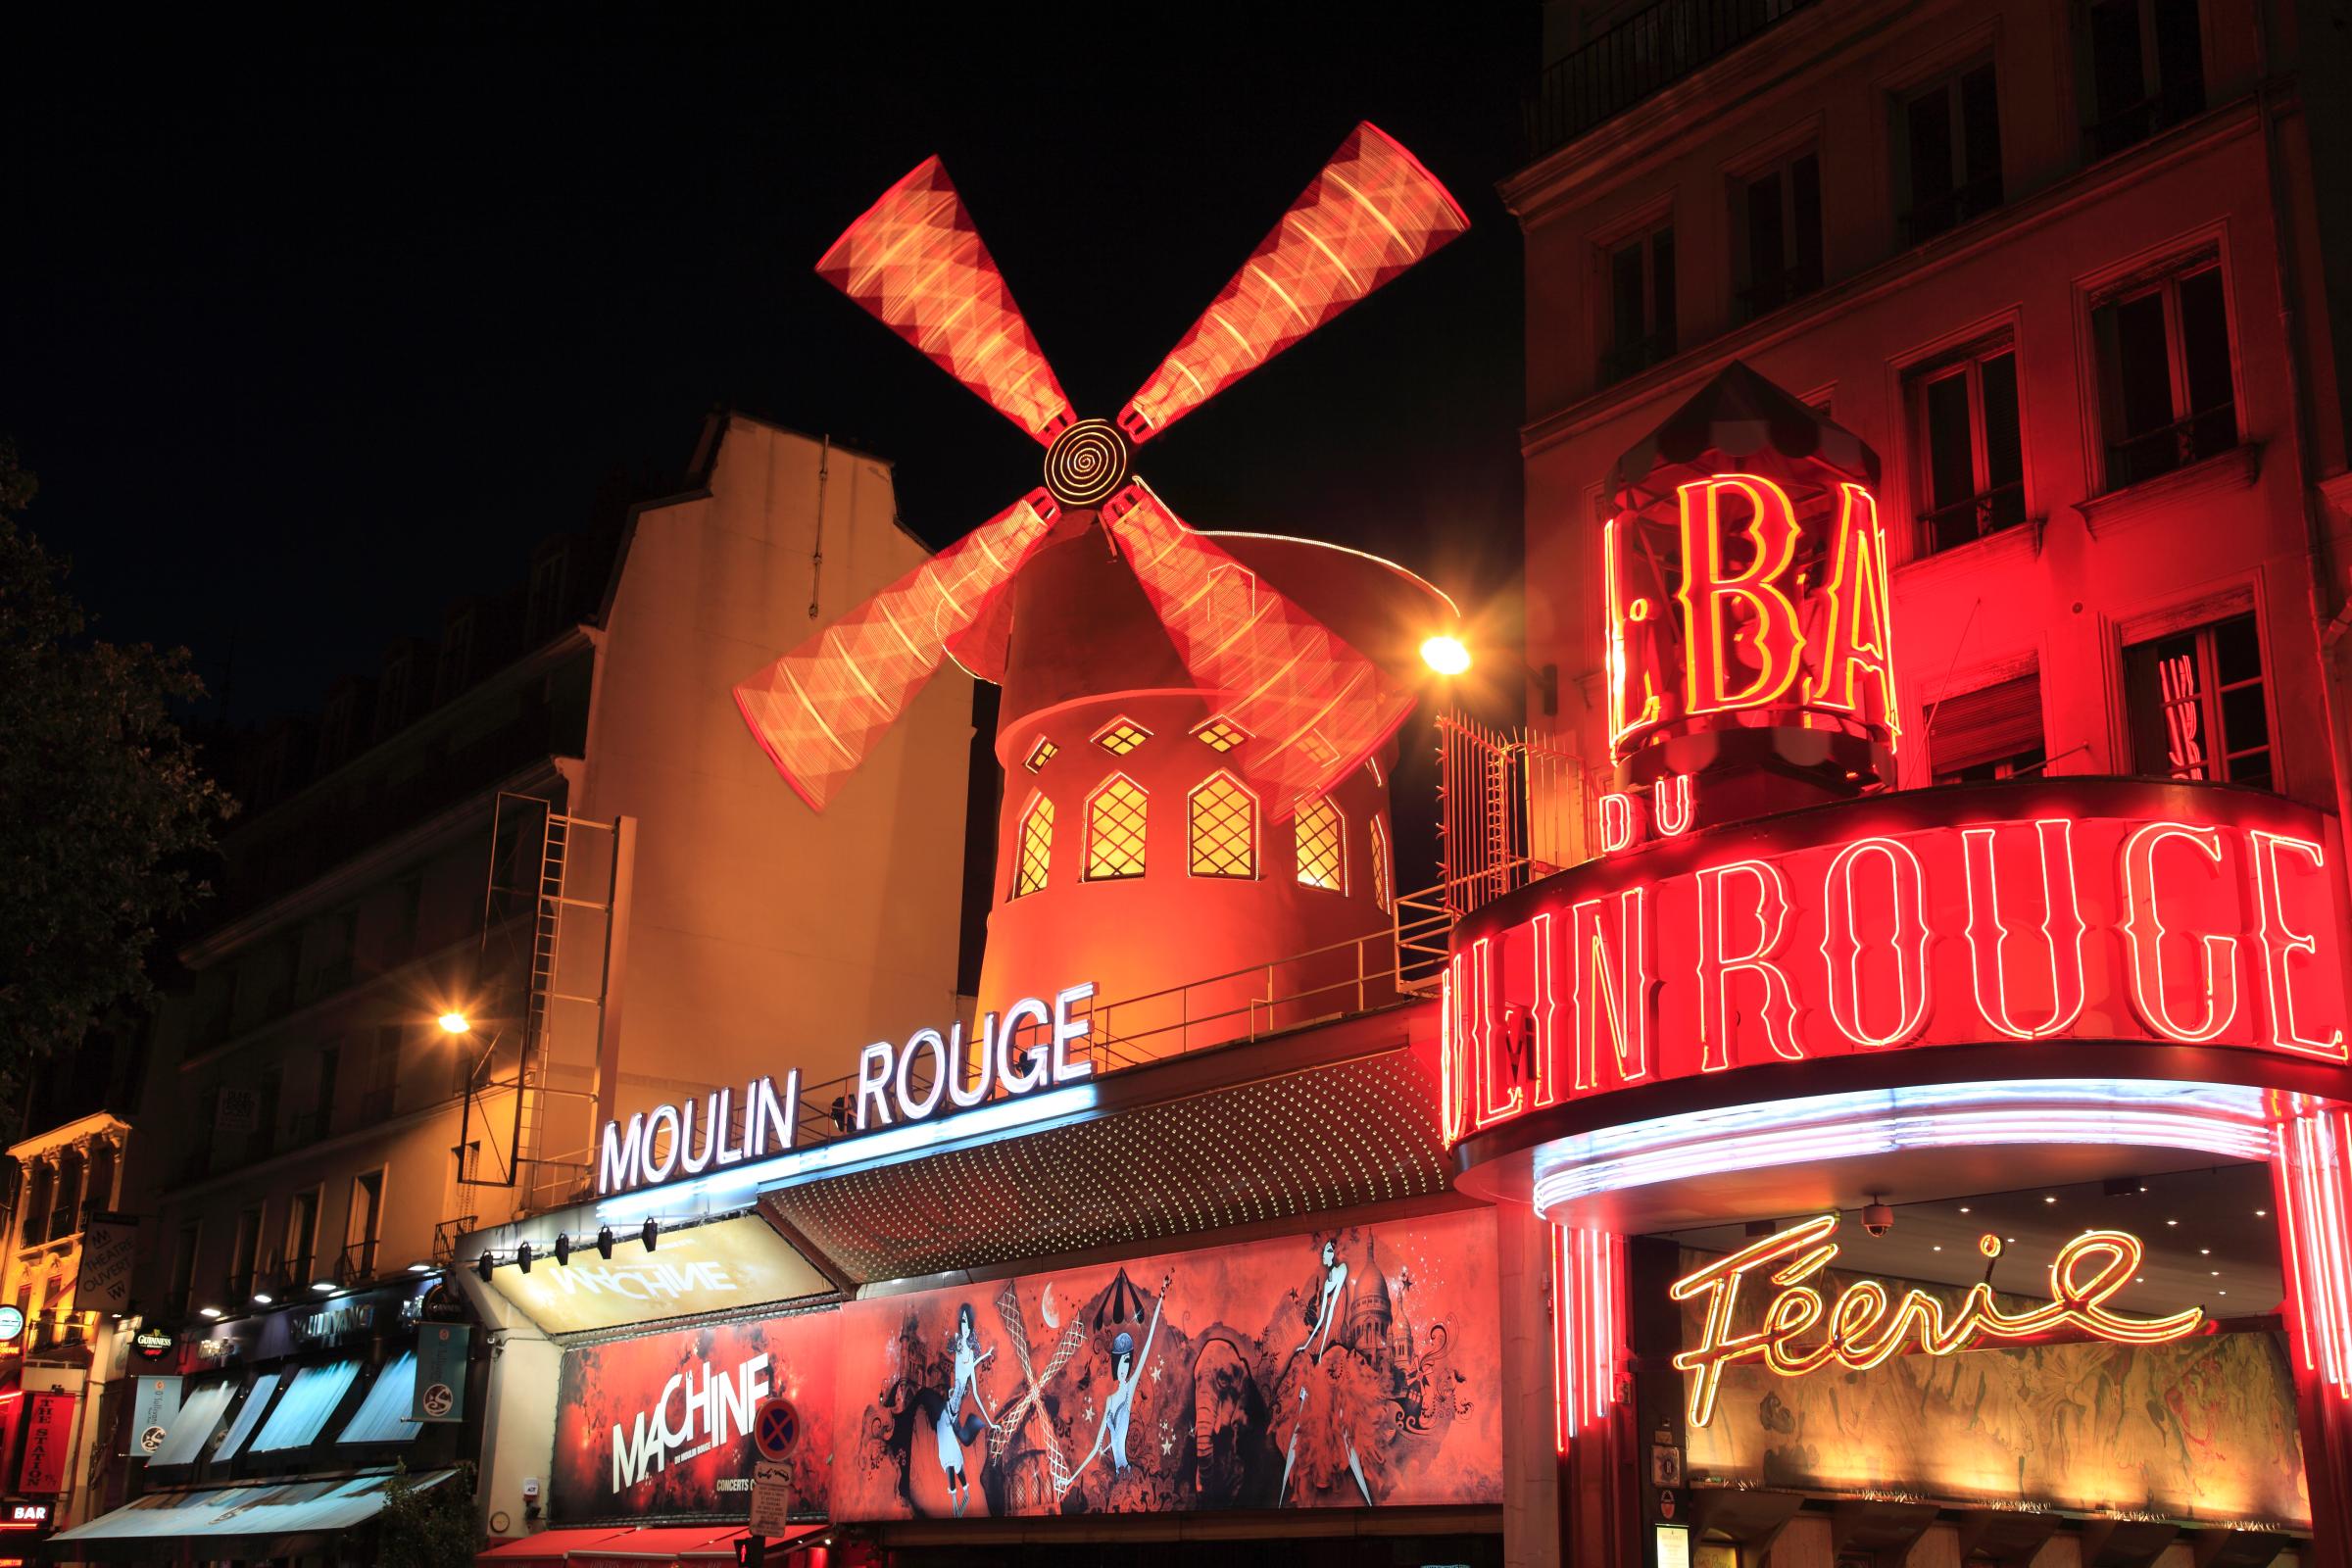 The night view of Moulin Rouge cabaret